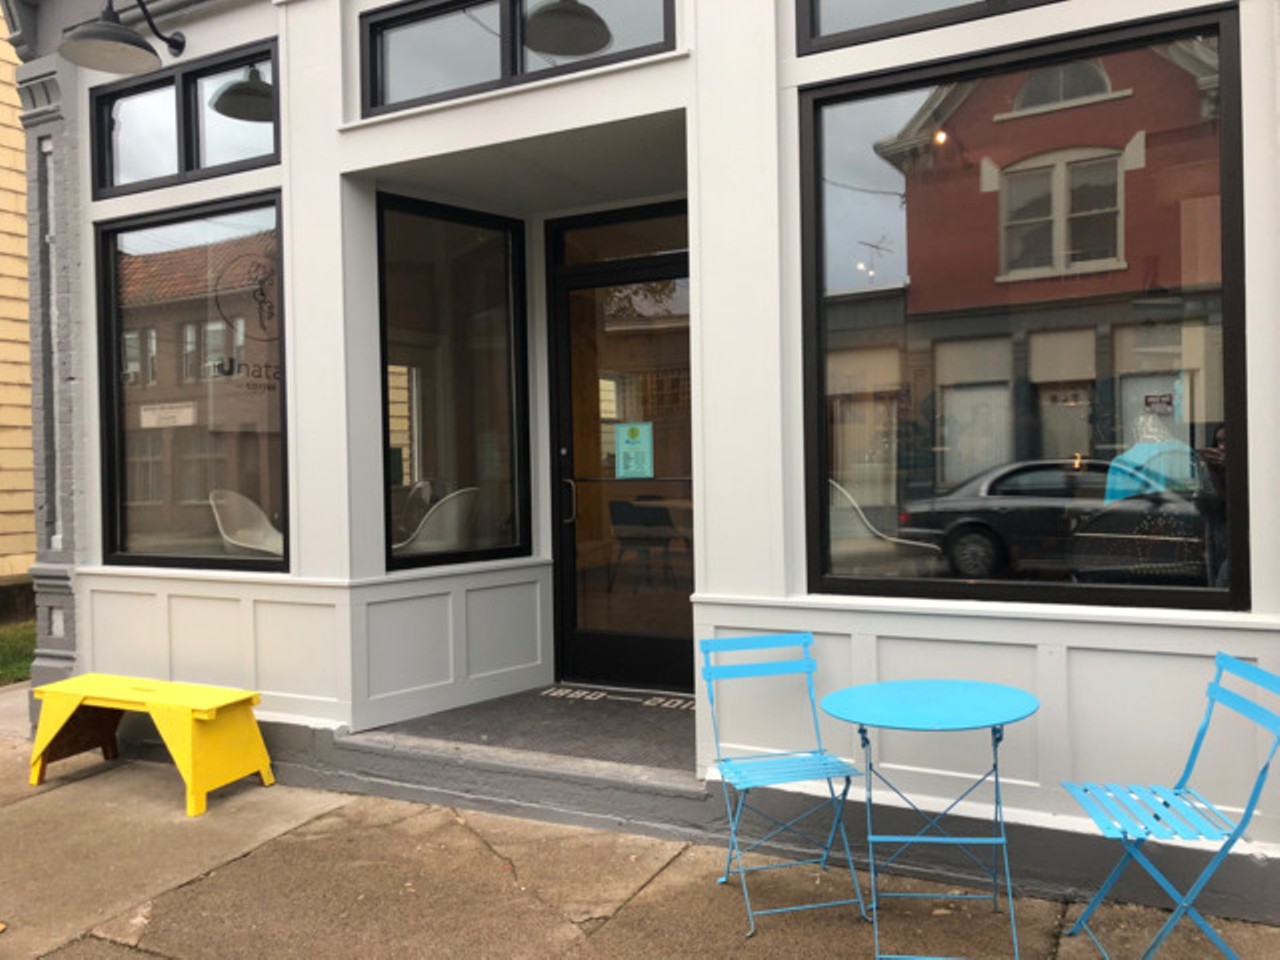 Unataza Coffee
620 6th Ave., Dayton, Kentucky
This local coffee pop-up opened their brick-and-mortar location in fall of 2019 in Dayton, Kentucky. The coffee shop offers Honduran coffee drinks, a light breakfast/lunch menu and pastries.  
Photo: Hailey Bollinger